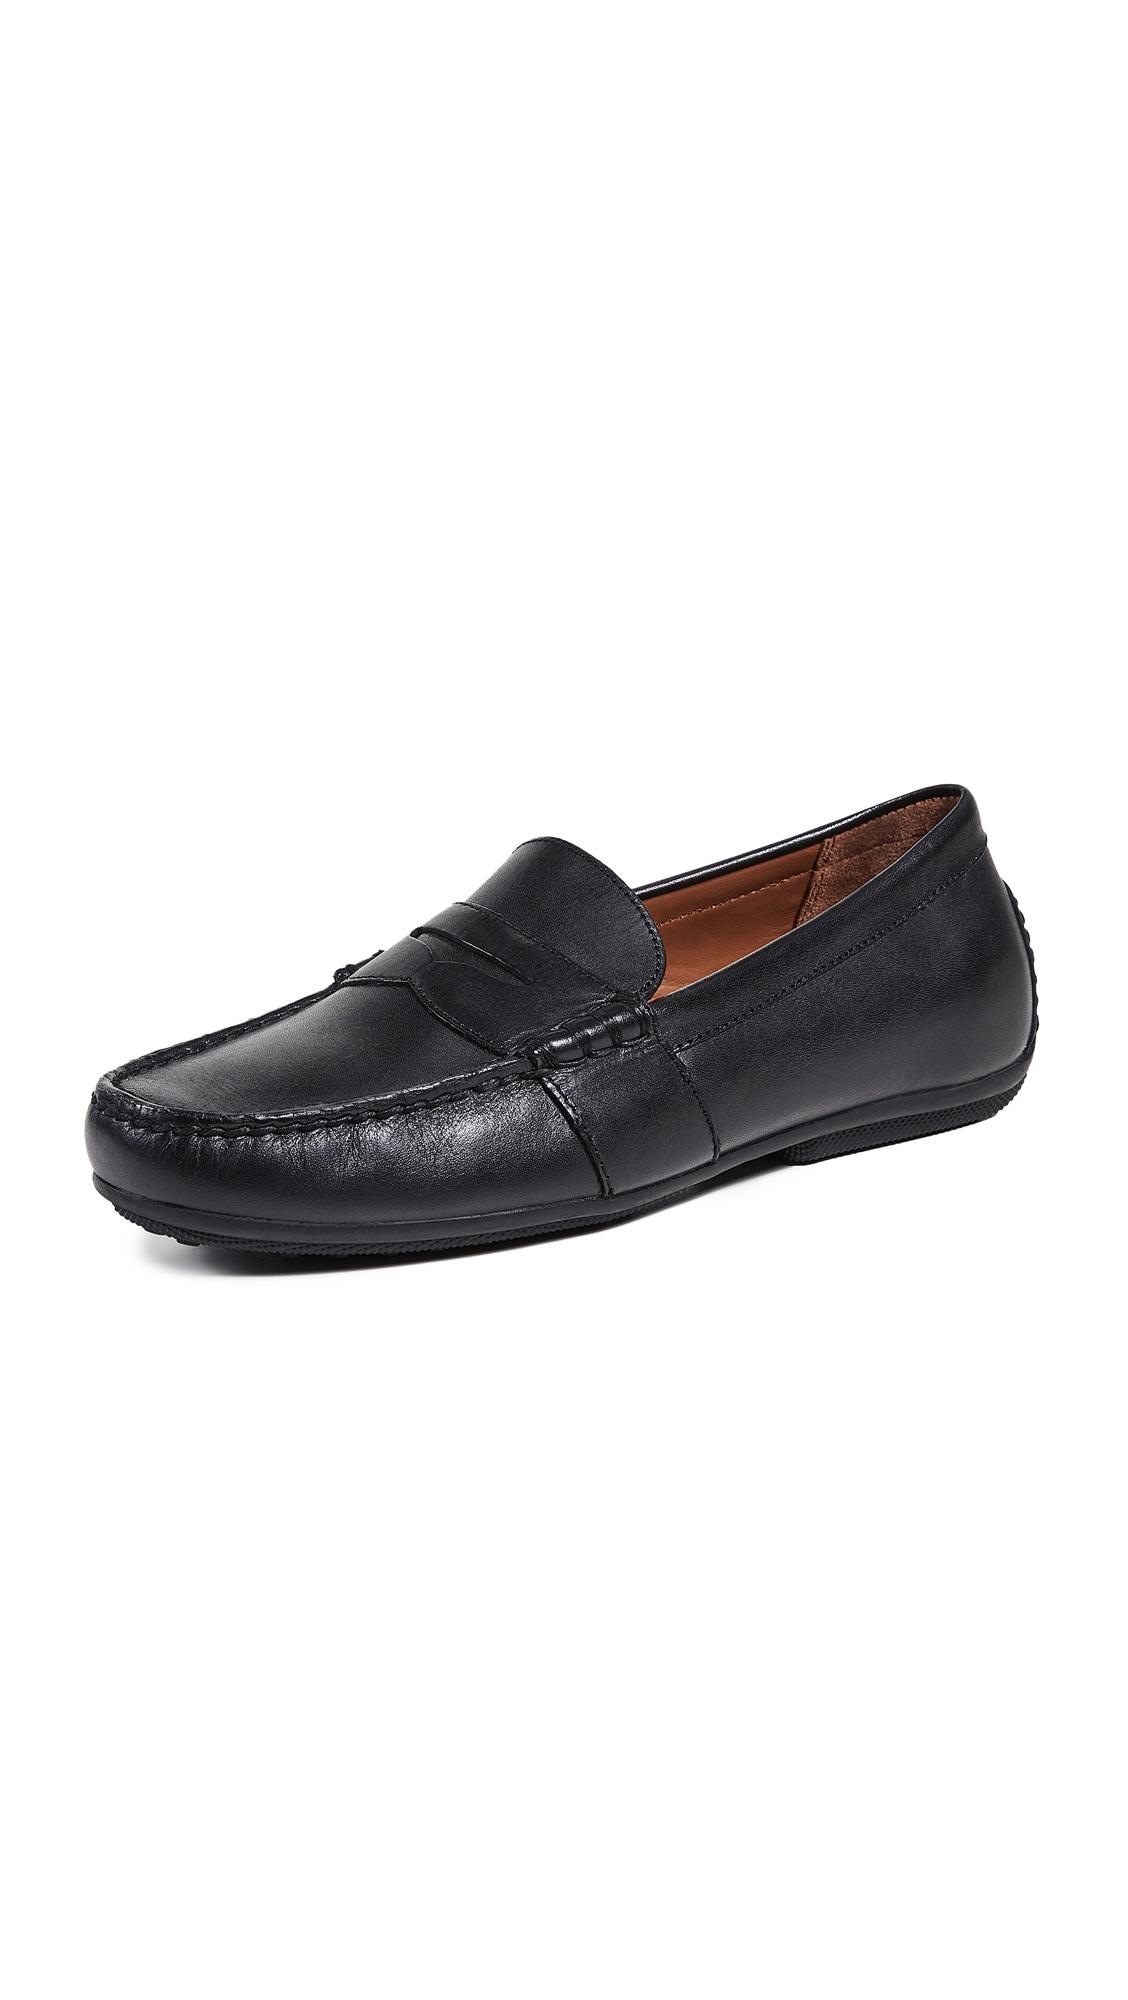 Polo Ralph Lauren Leather Reynold Loafers in Black for Men - Lyst